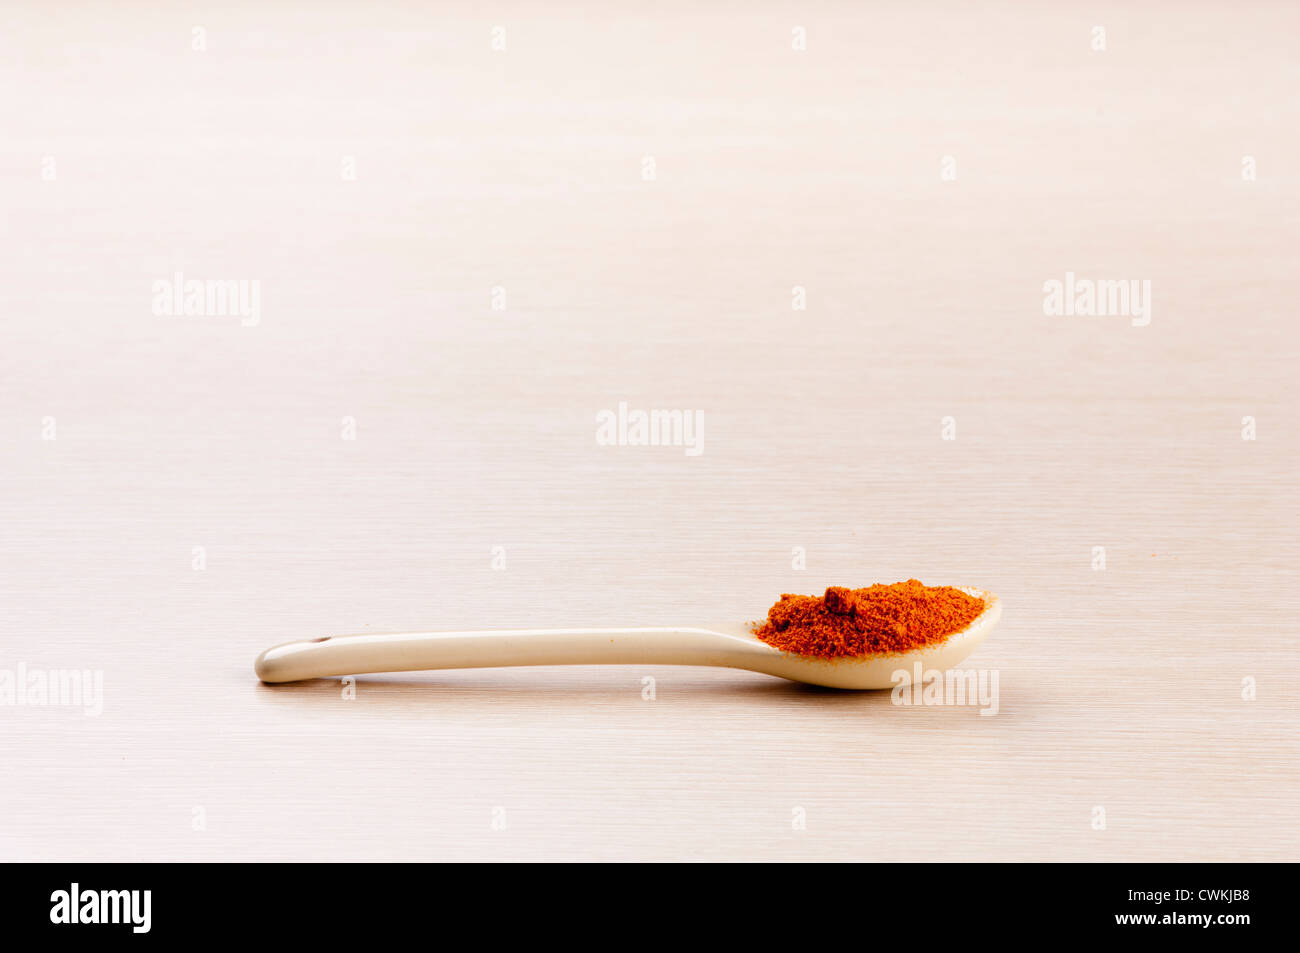 Cayenne Pepper in a spoon over a blured wooden background with copy space Stock Photo